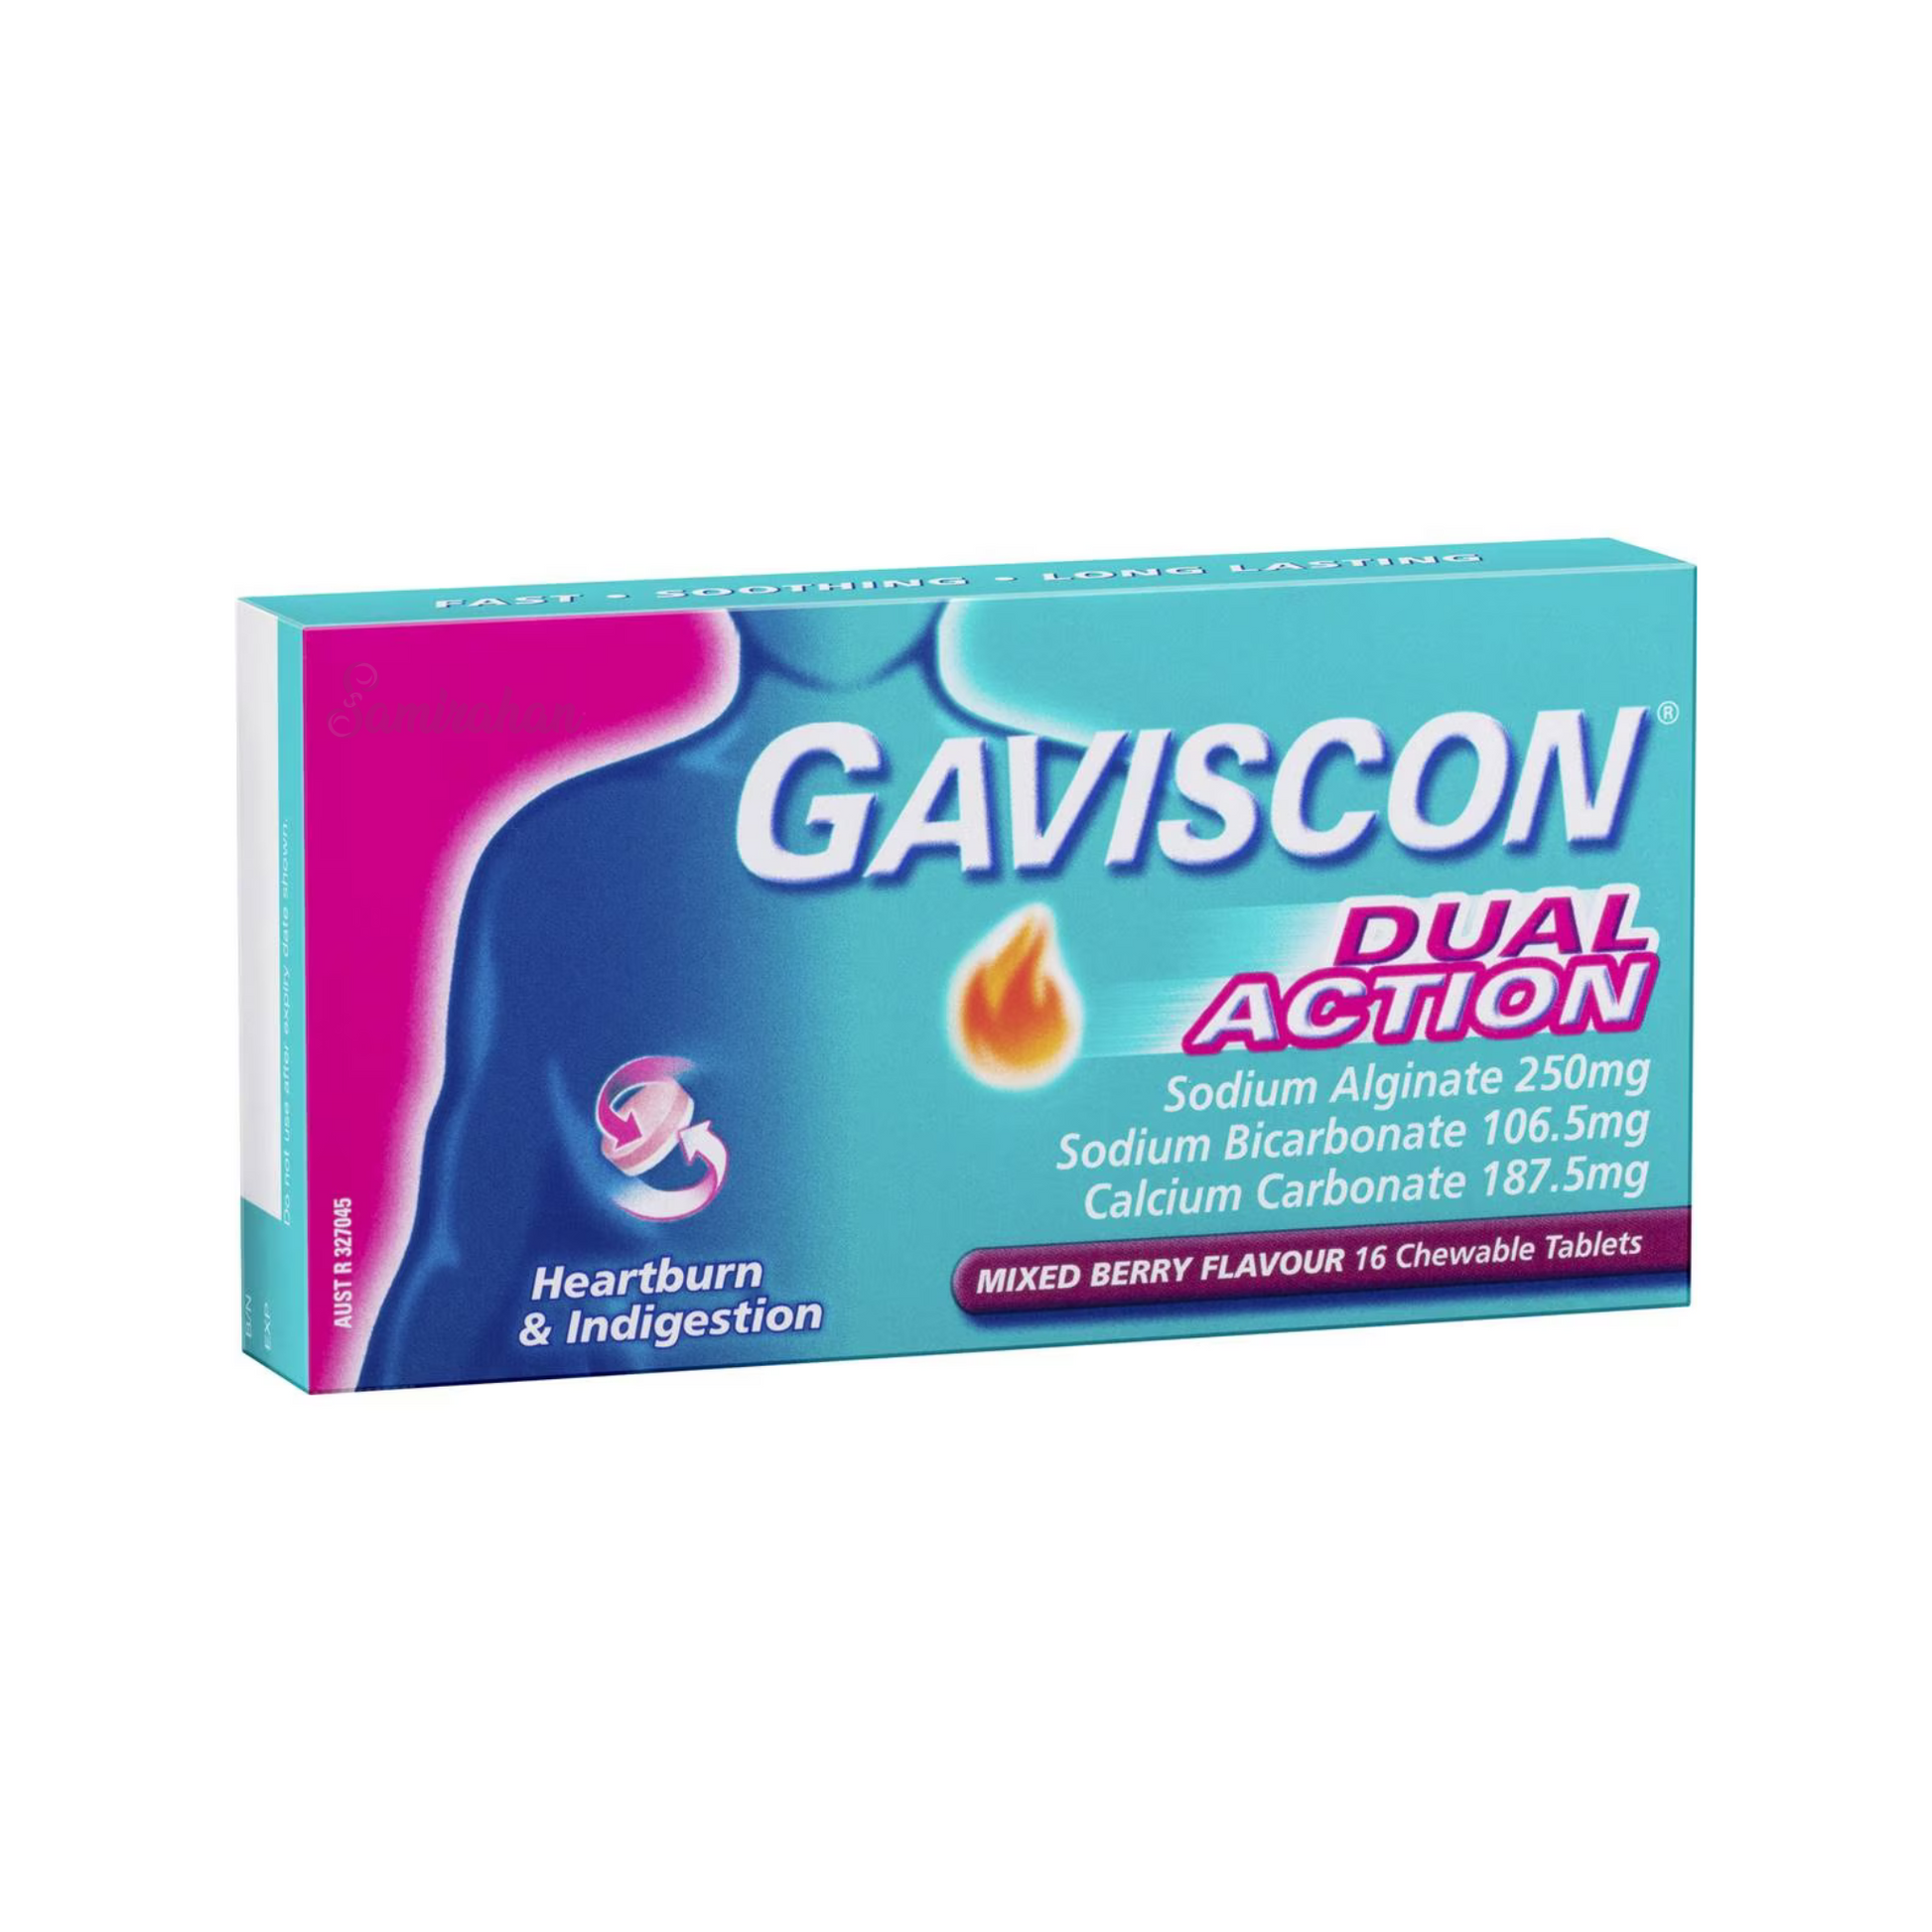 Gaviscon Dual Action Relief Mixed Berry is a dual-acting formula for heartburn & indigestion. These Chewable Tablets helps relieve gastric problem. Best imported foreign Australian Aussie genuine authentic premium quality real healthy gas stomach ache cure medicine cheap price in Dhaka Chittagong Sylhet Bangladesh.